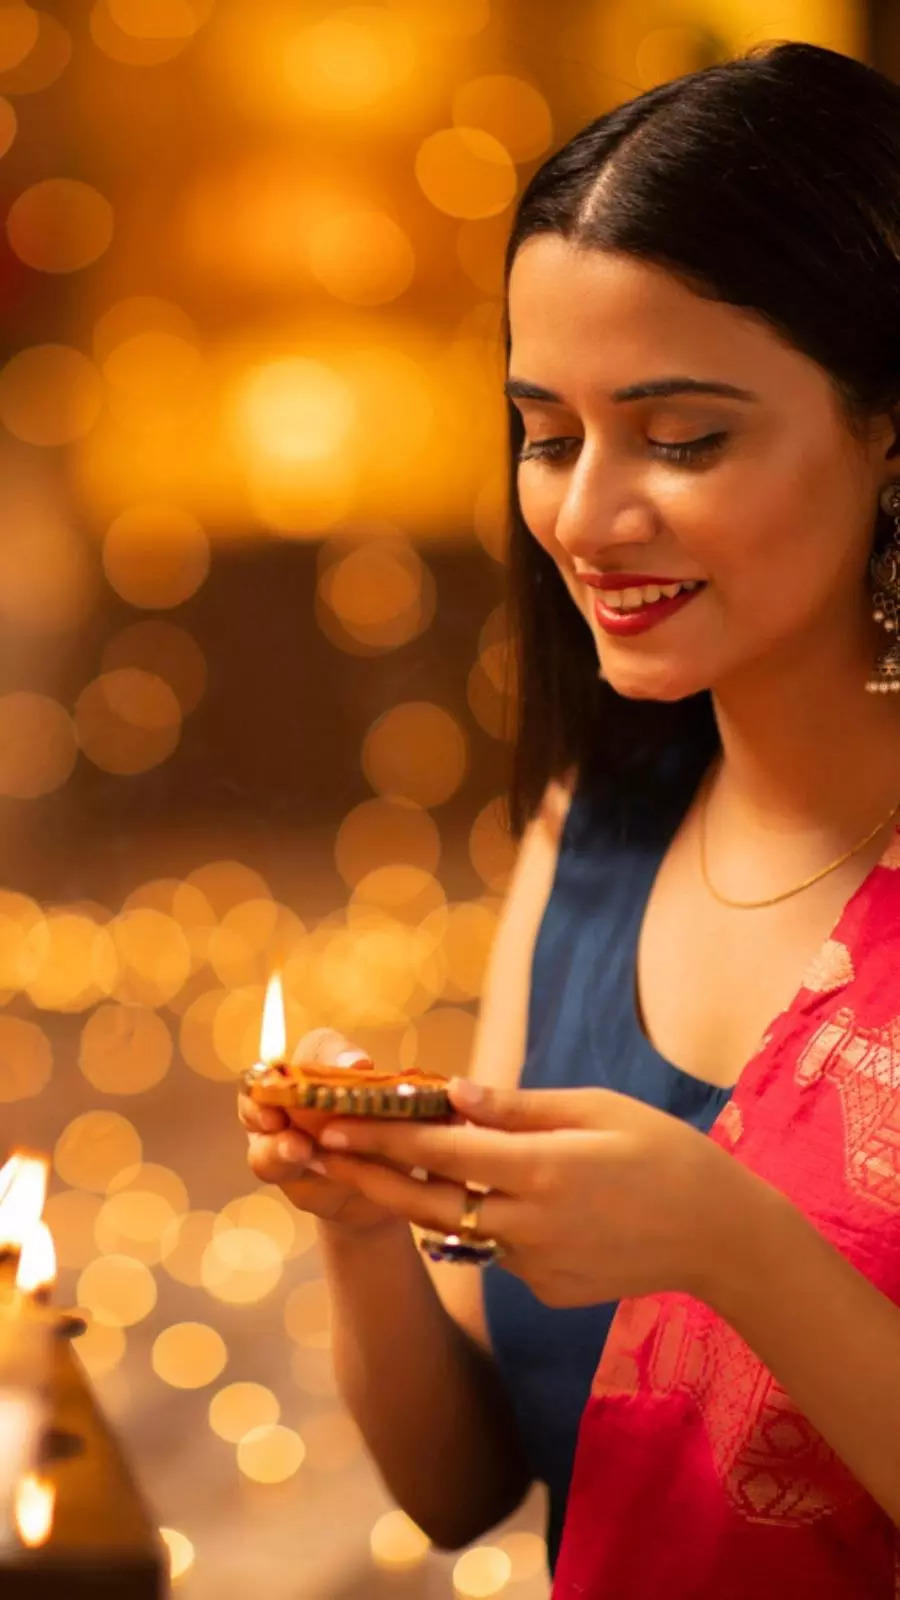 Indian Couple Diwali Photos and Images & Pictures | Shutterstock